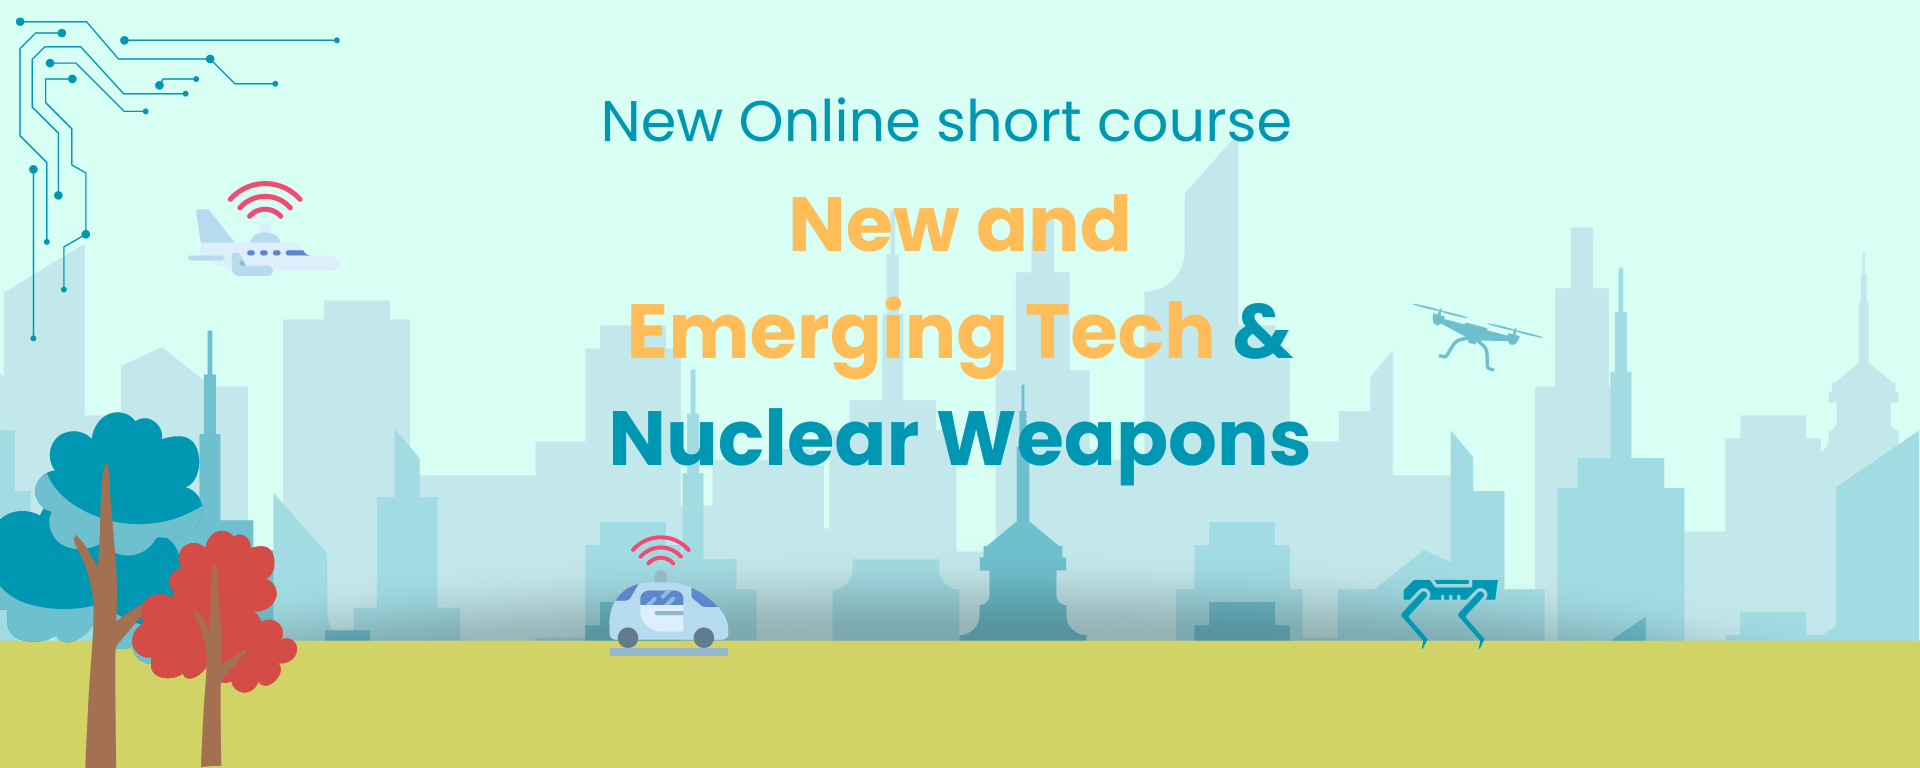 New and Emerging Technologies & Nuclear Weapons Online Course